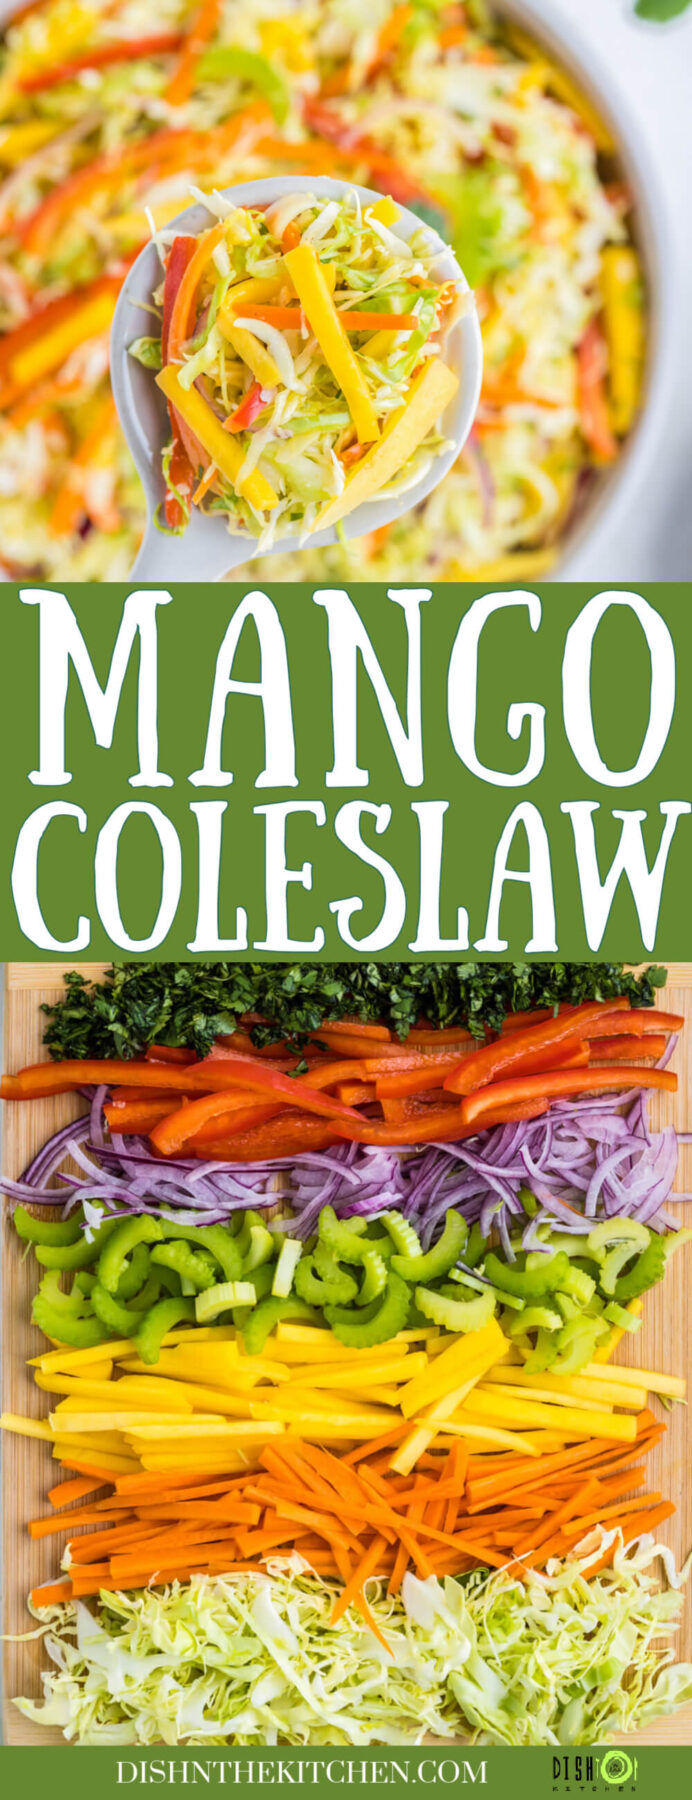 Pinterest image featuring a rainbow of sliced coleslaw ingredients and a bowl of creamy mango slaw.